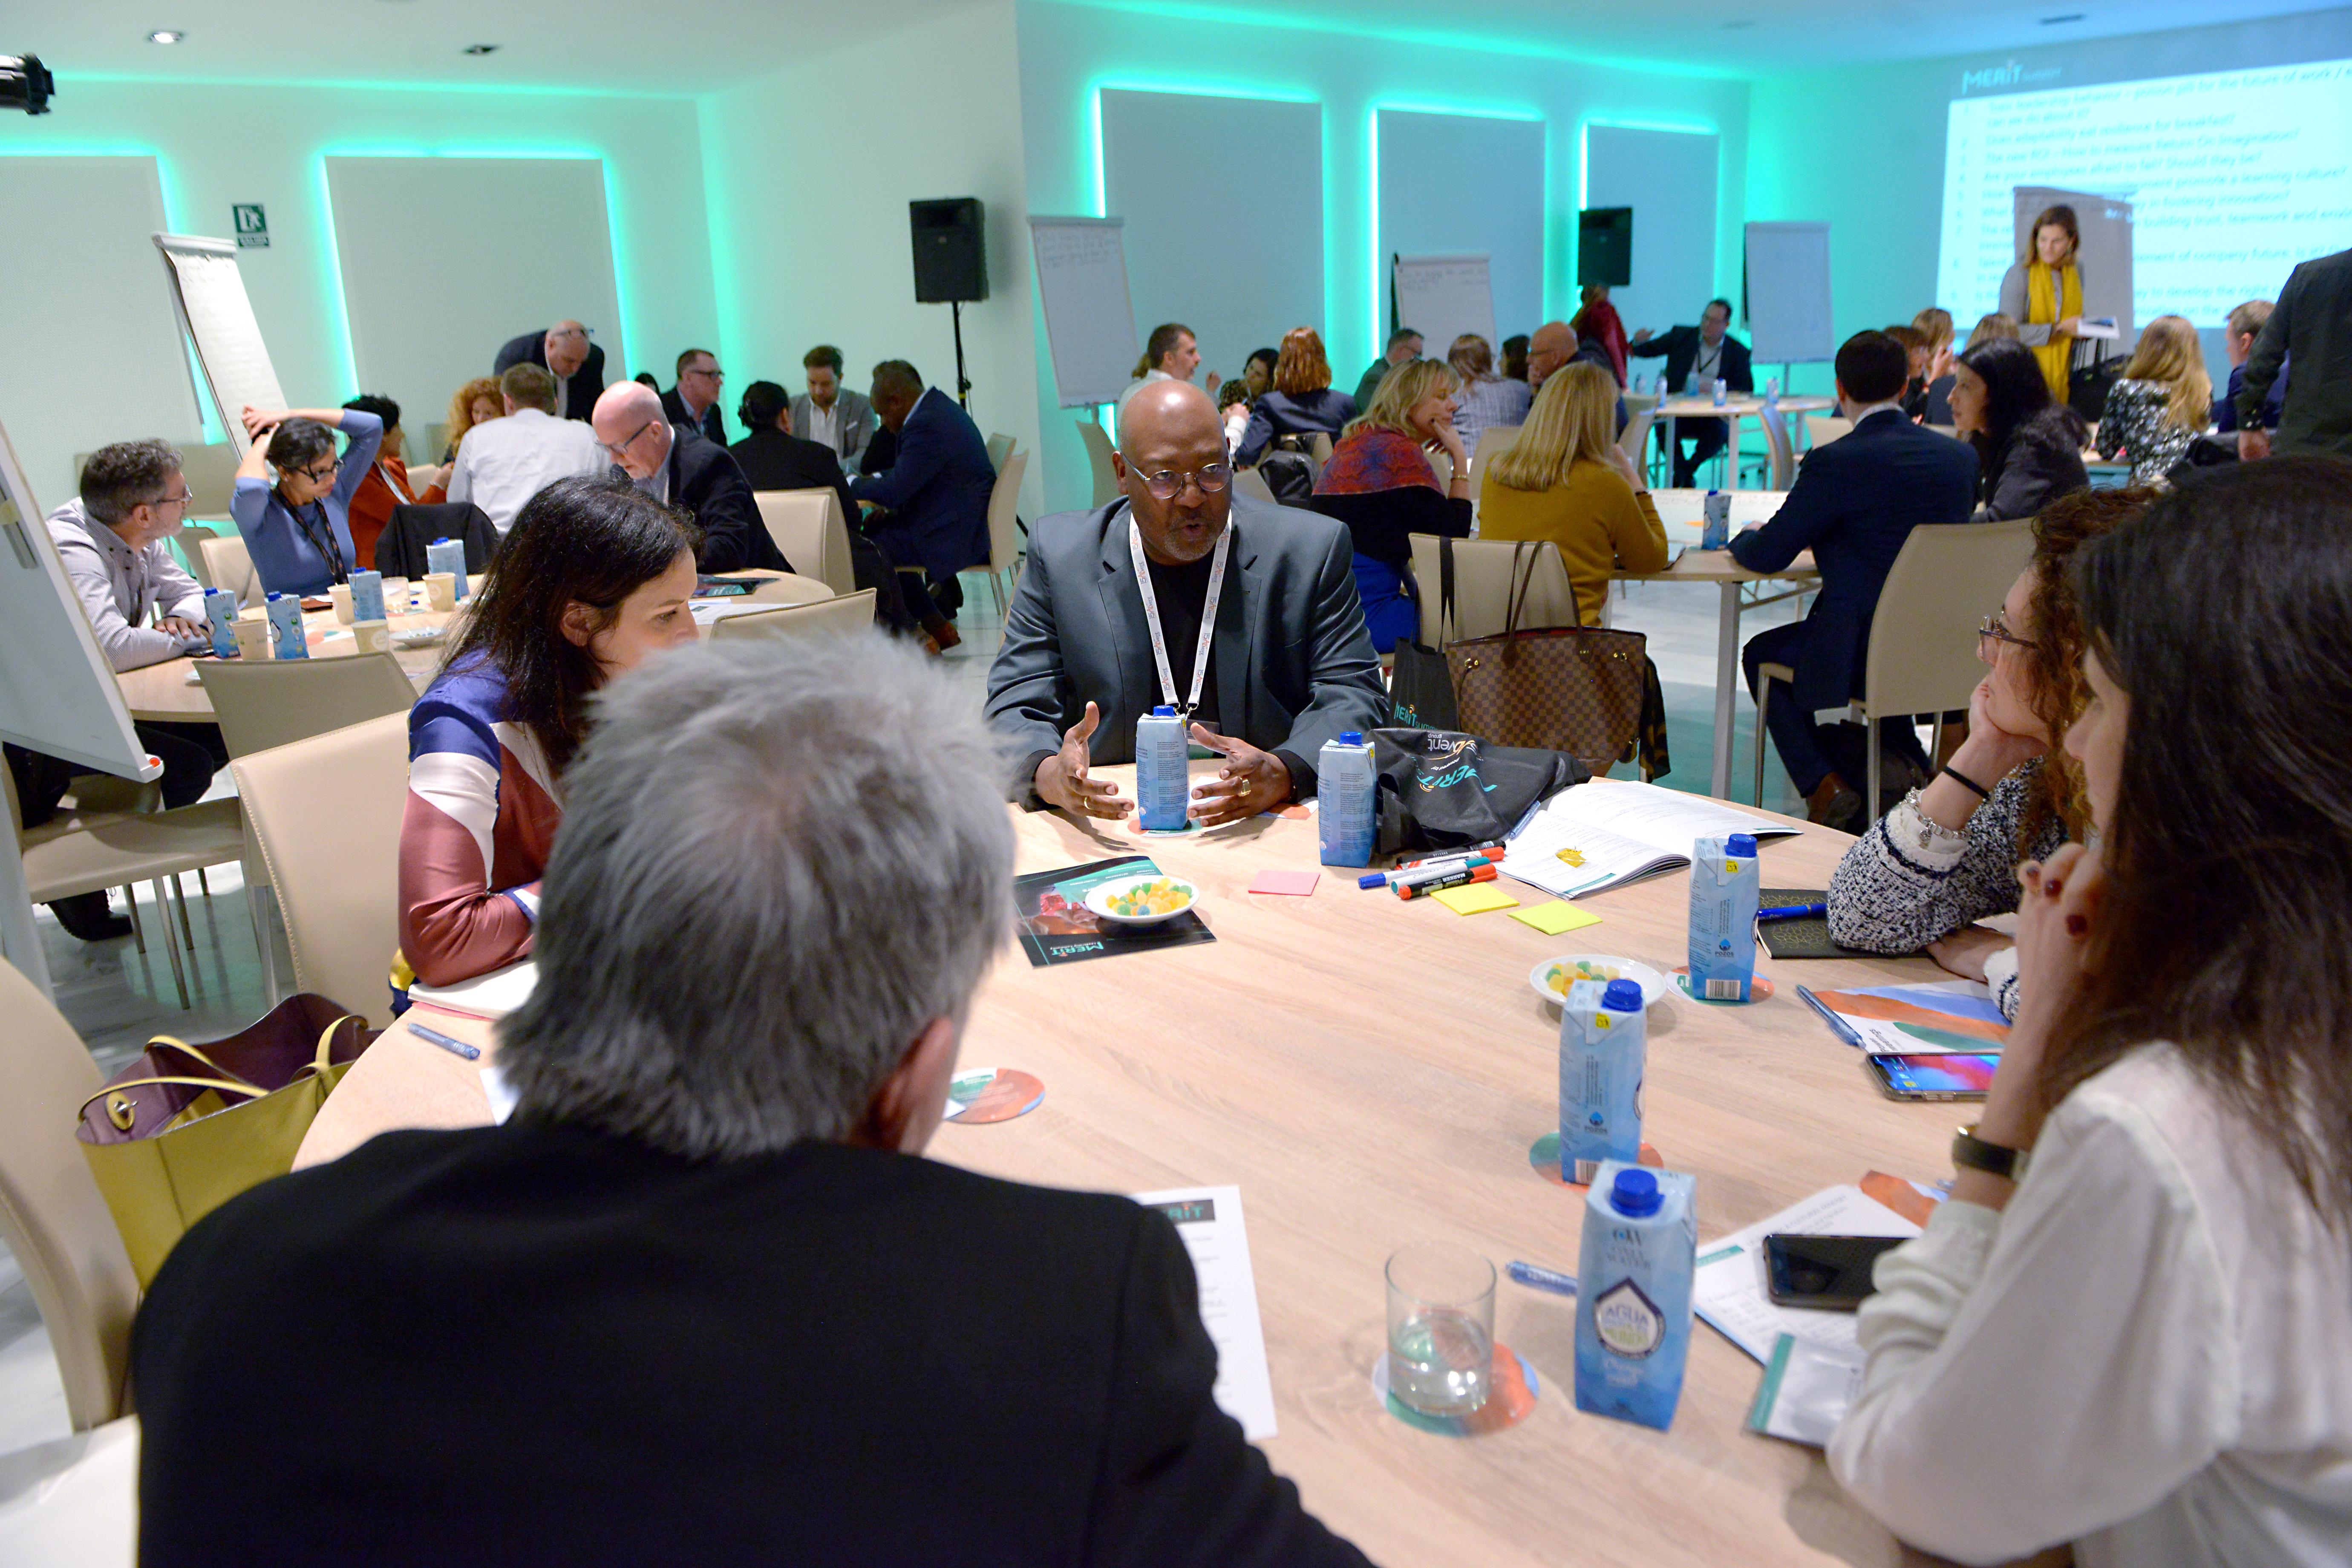 HR and L&D decision-makers and learning experts participate in round-table discussions during the MERIT Annual Summit.